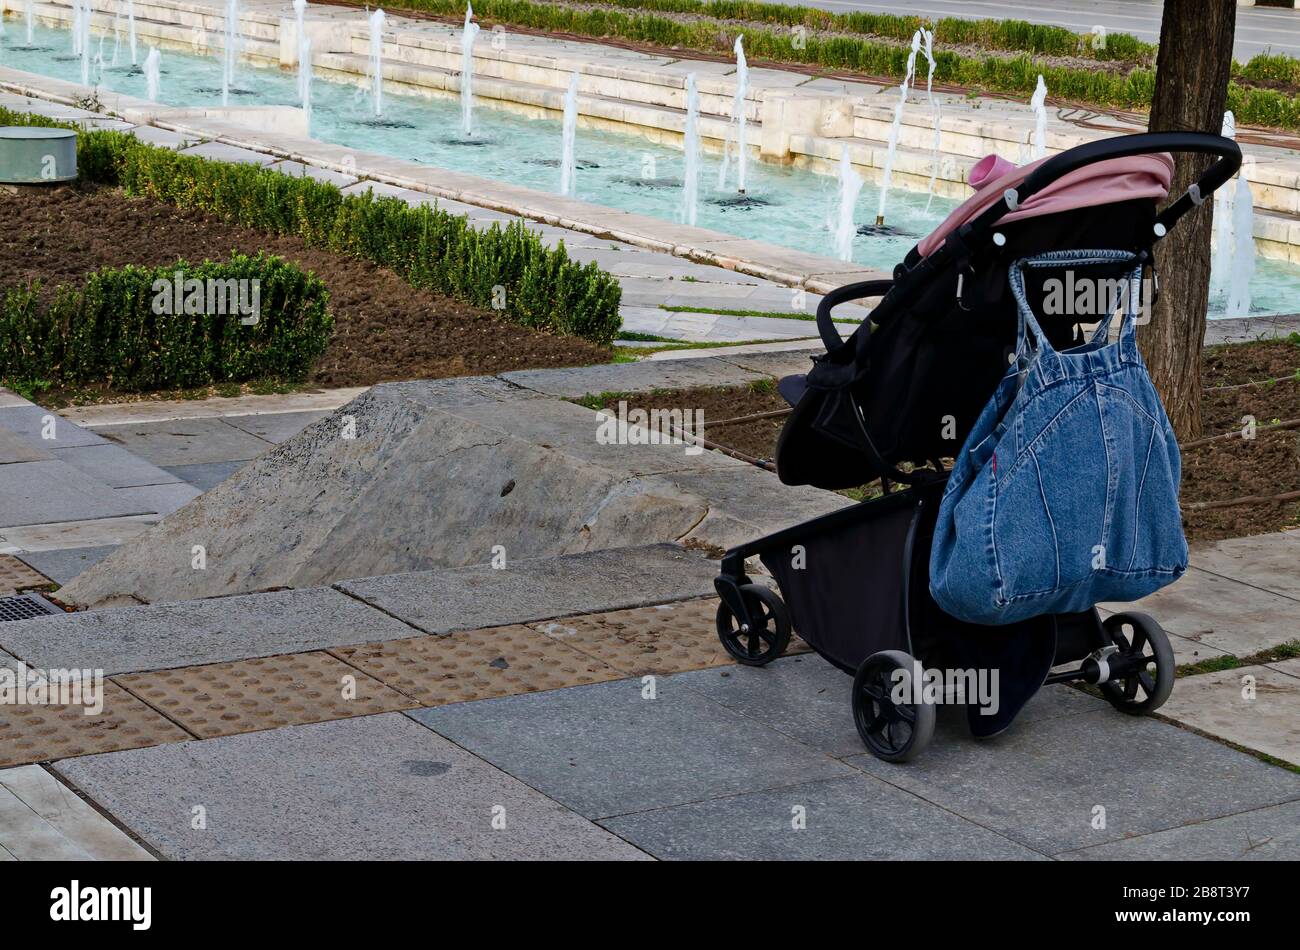 Photo of a stroller near the water fountains in front of the National Palace of Culture, suitable for cool Bulgarian beauty, Sofia, Bulgaria Stock Photo